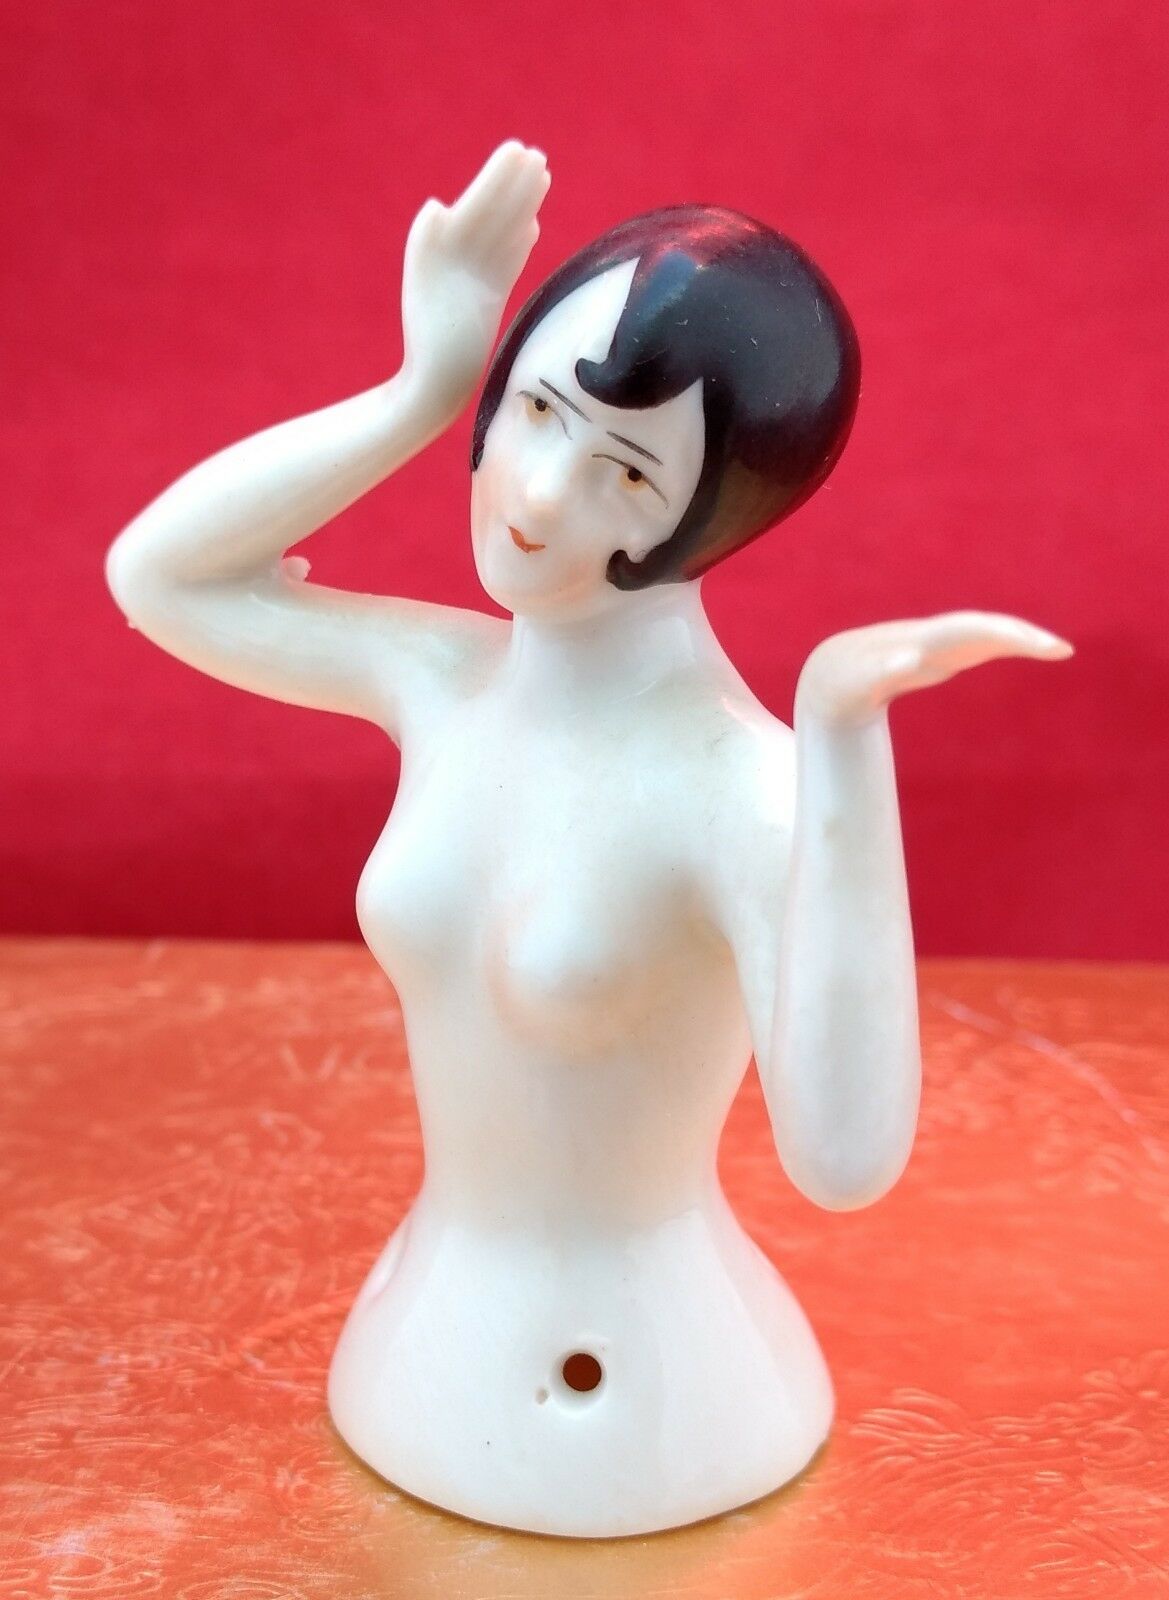 Half-doll Porcelain Flapper Arms Away Antique Germany Nude 2-1/2” Pin Cushion